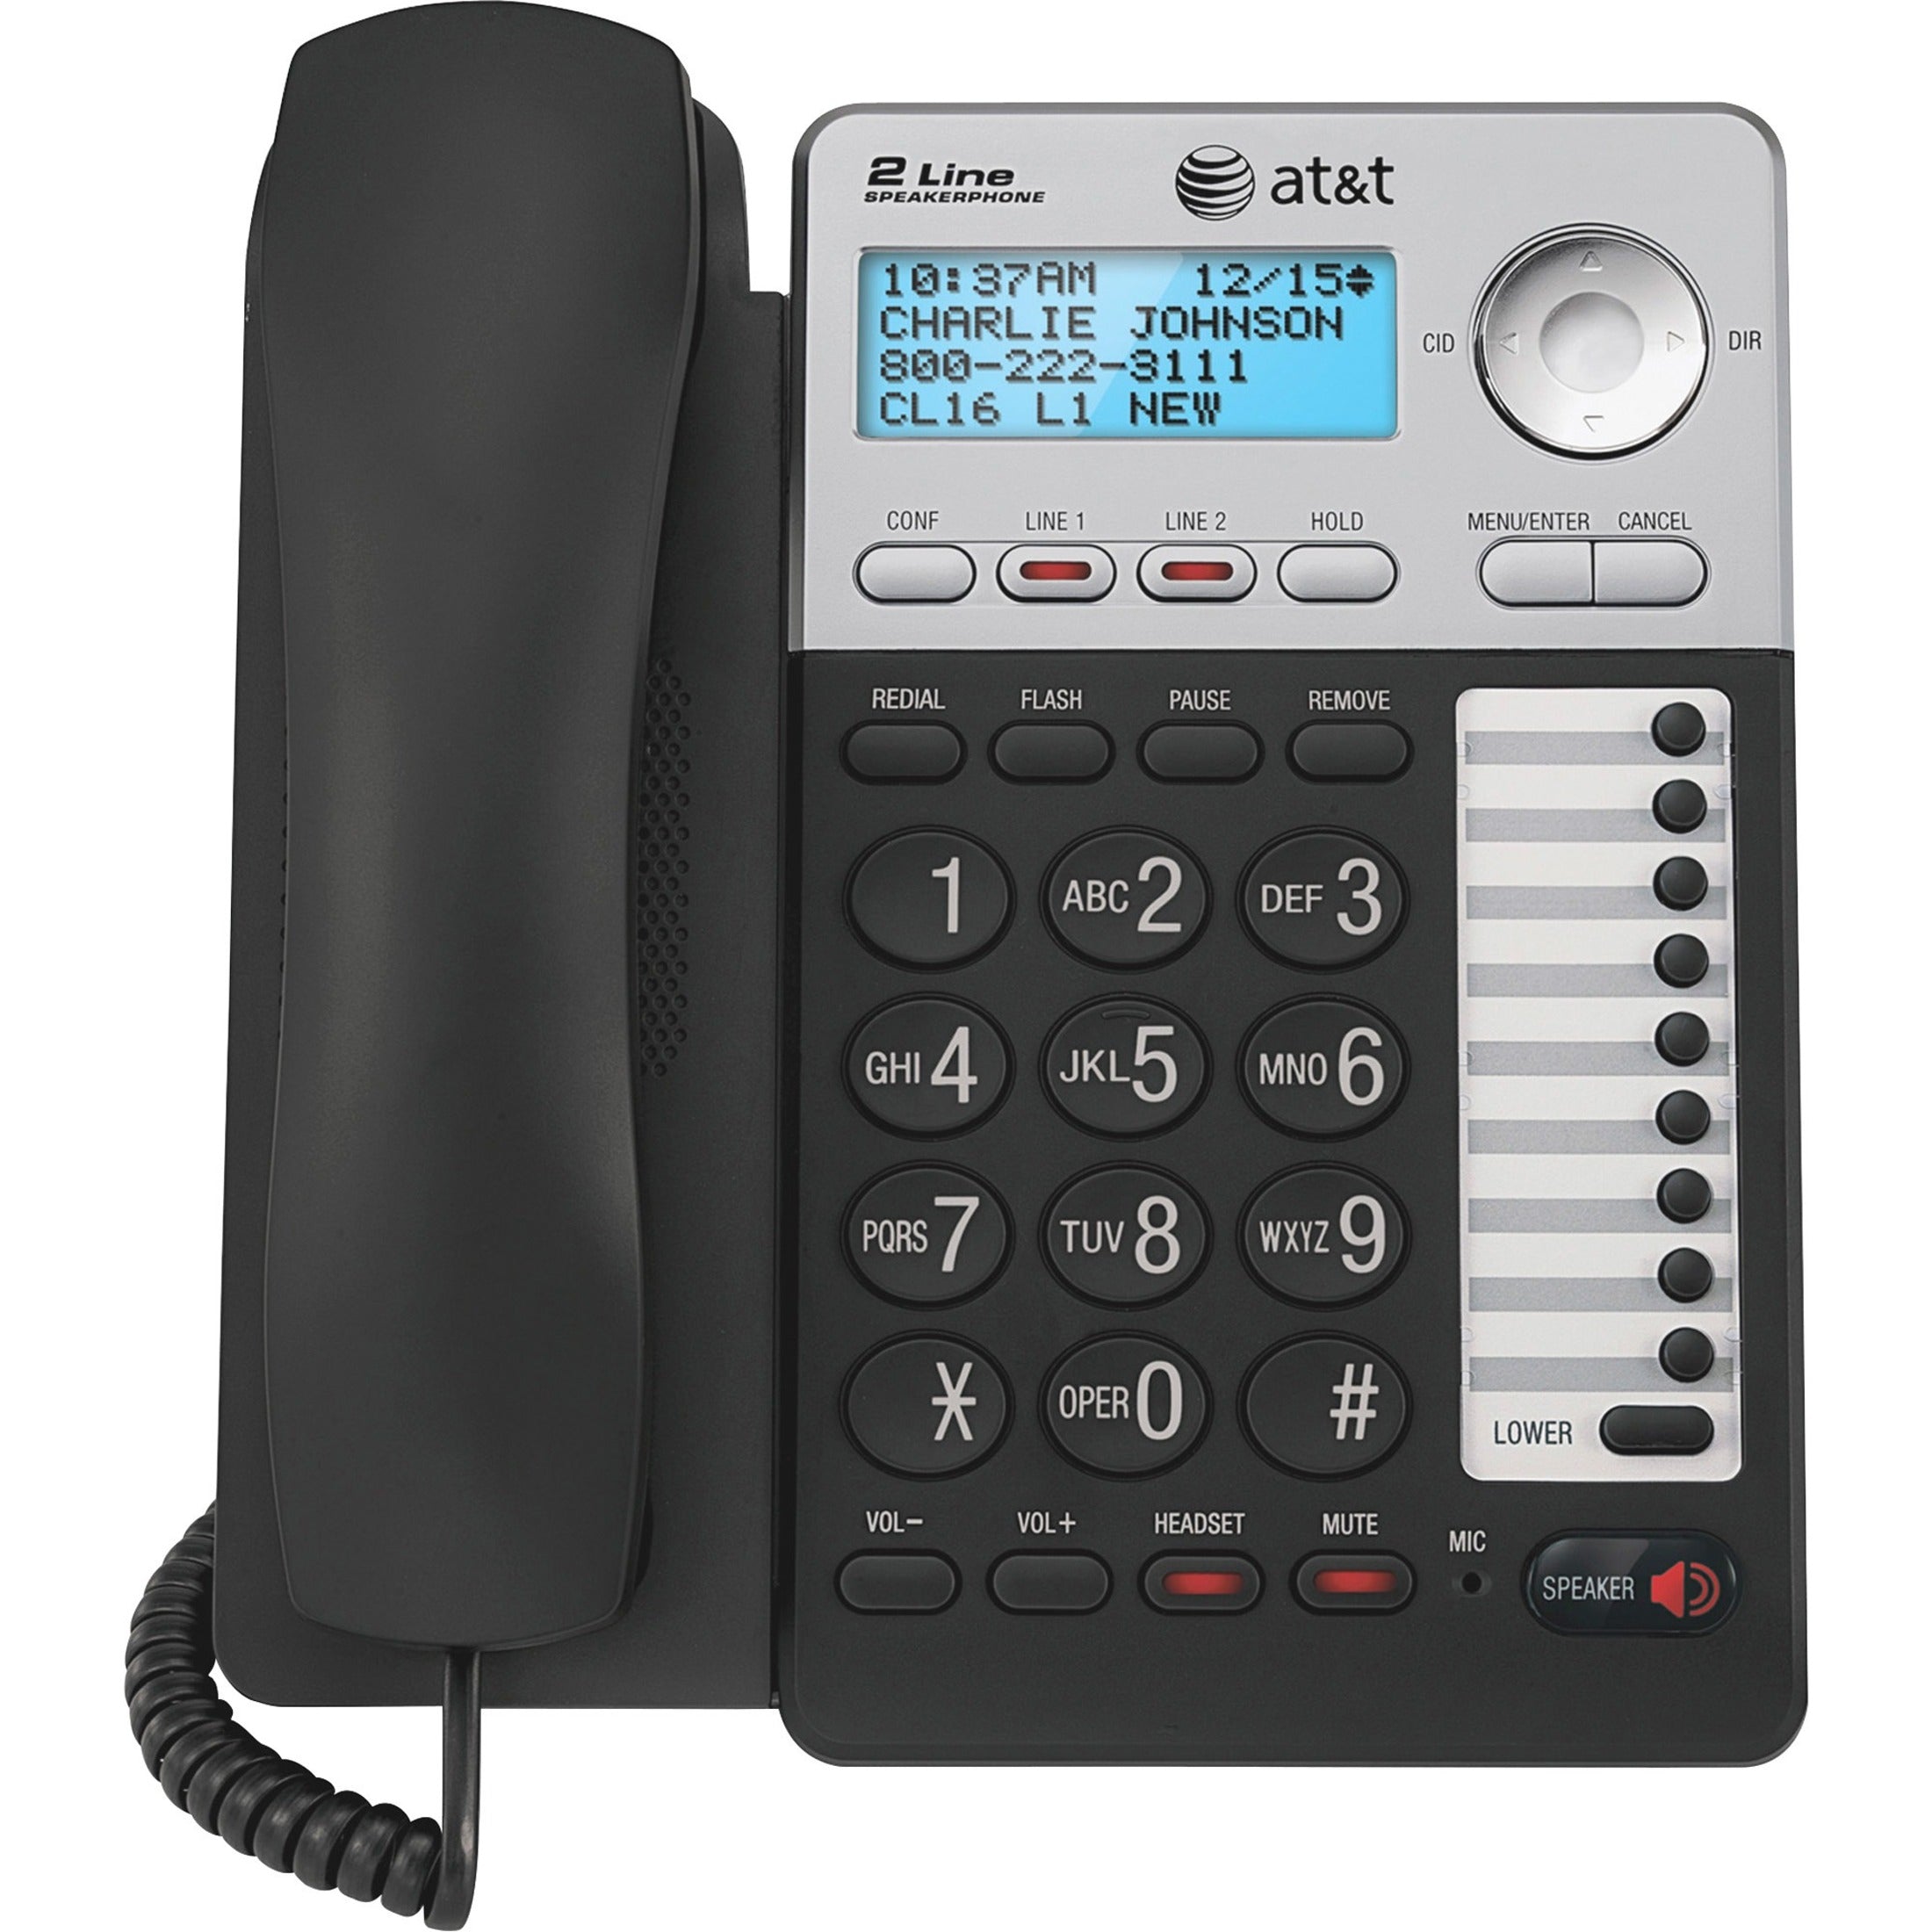 AT&T ML17929 Standard Phone, 2-Line Speaker Phone with Caller ID, Corded, Black/Silver